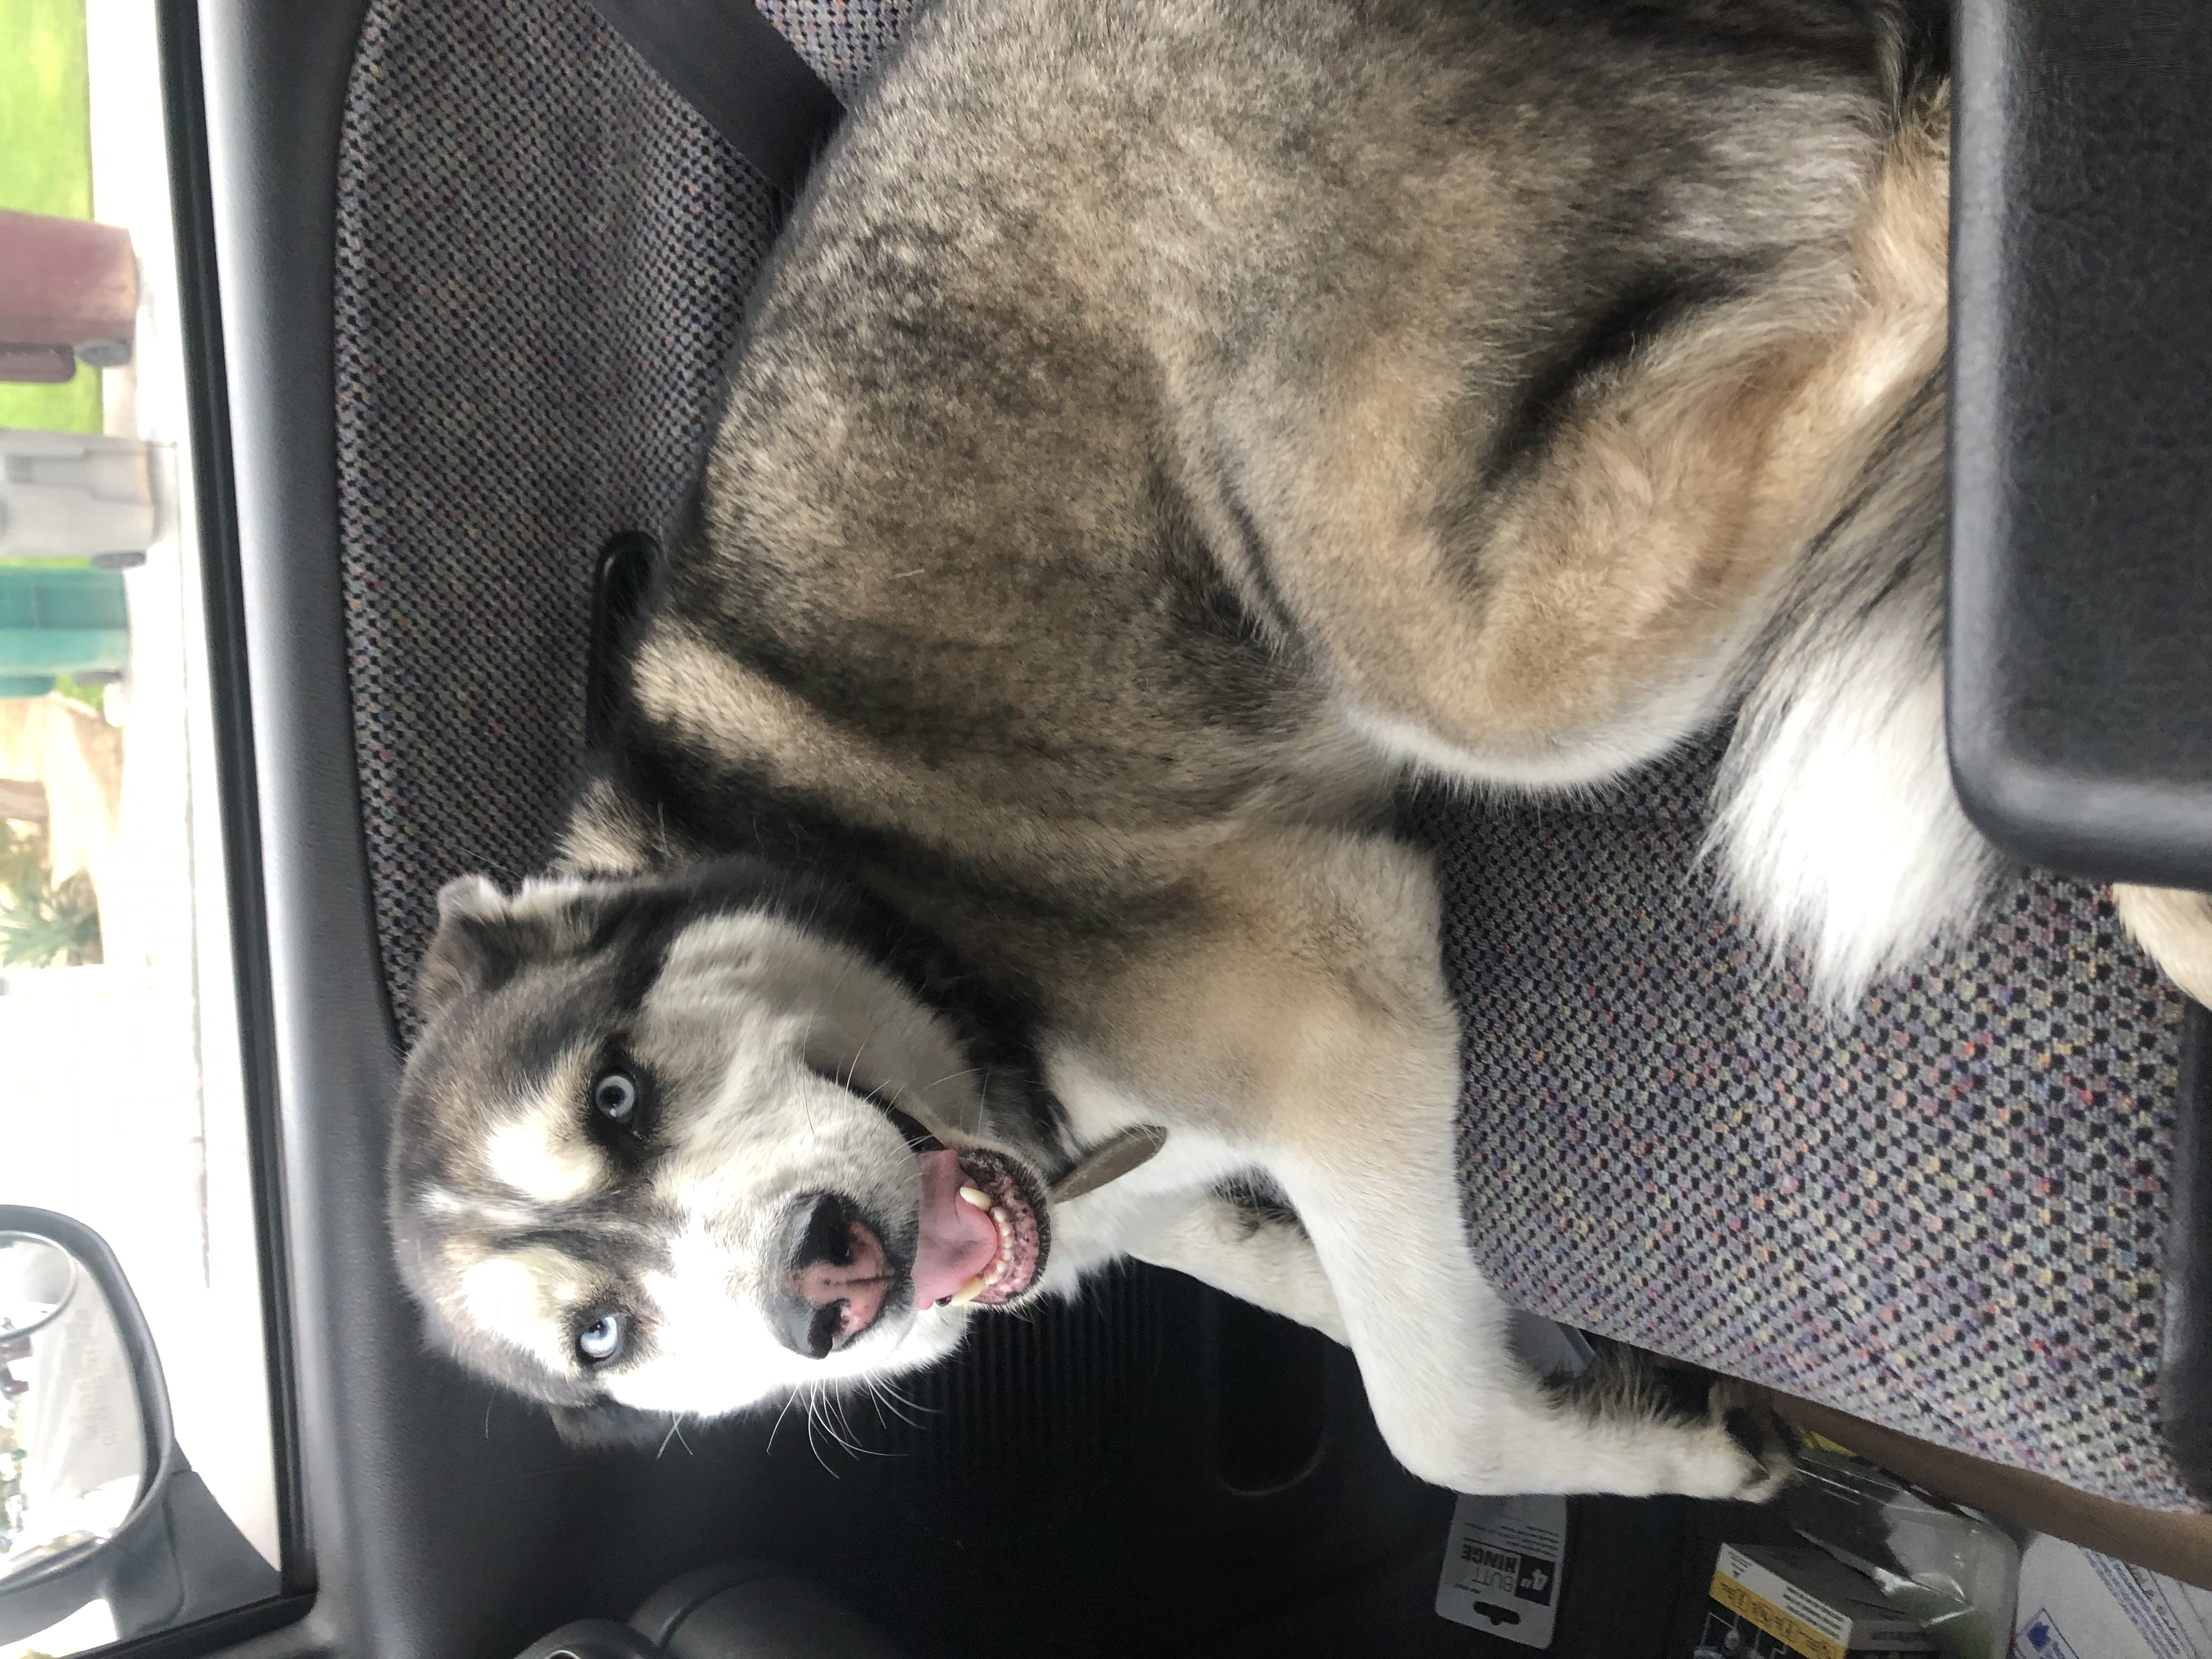 A black and white husky in the front seat of the car with a guilty look on her face and her tongue out.